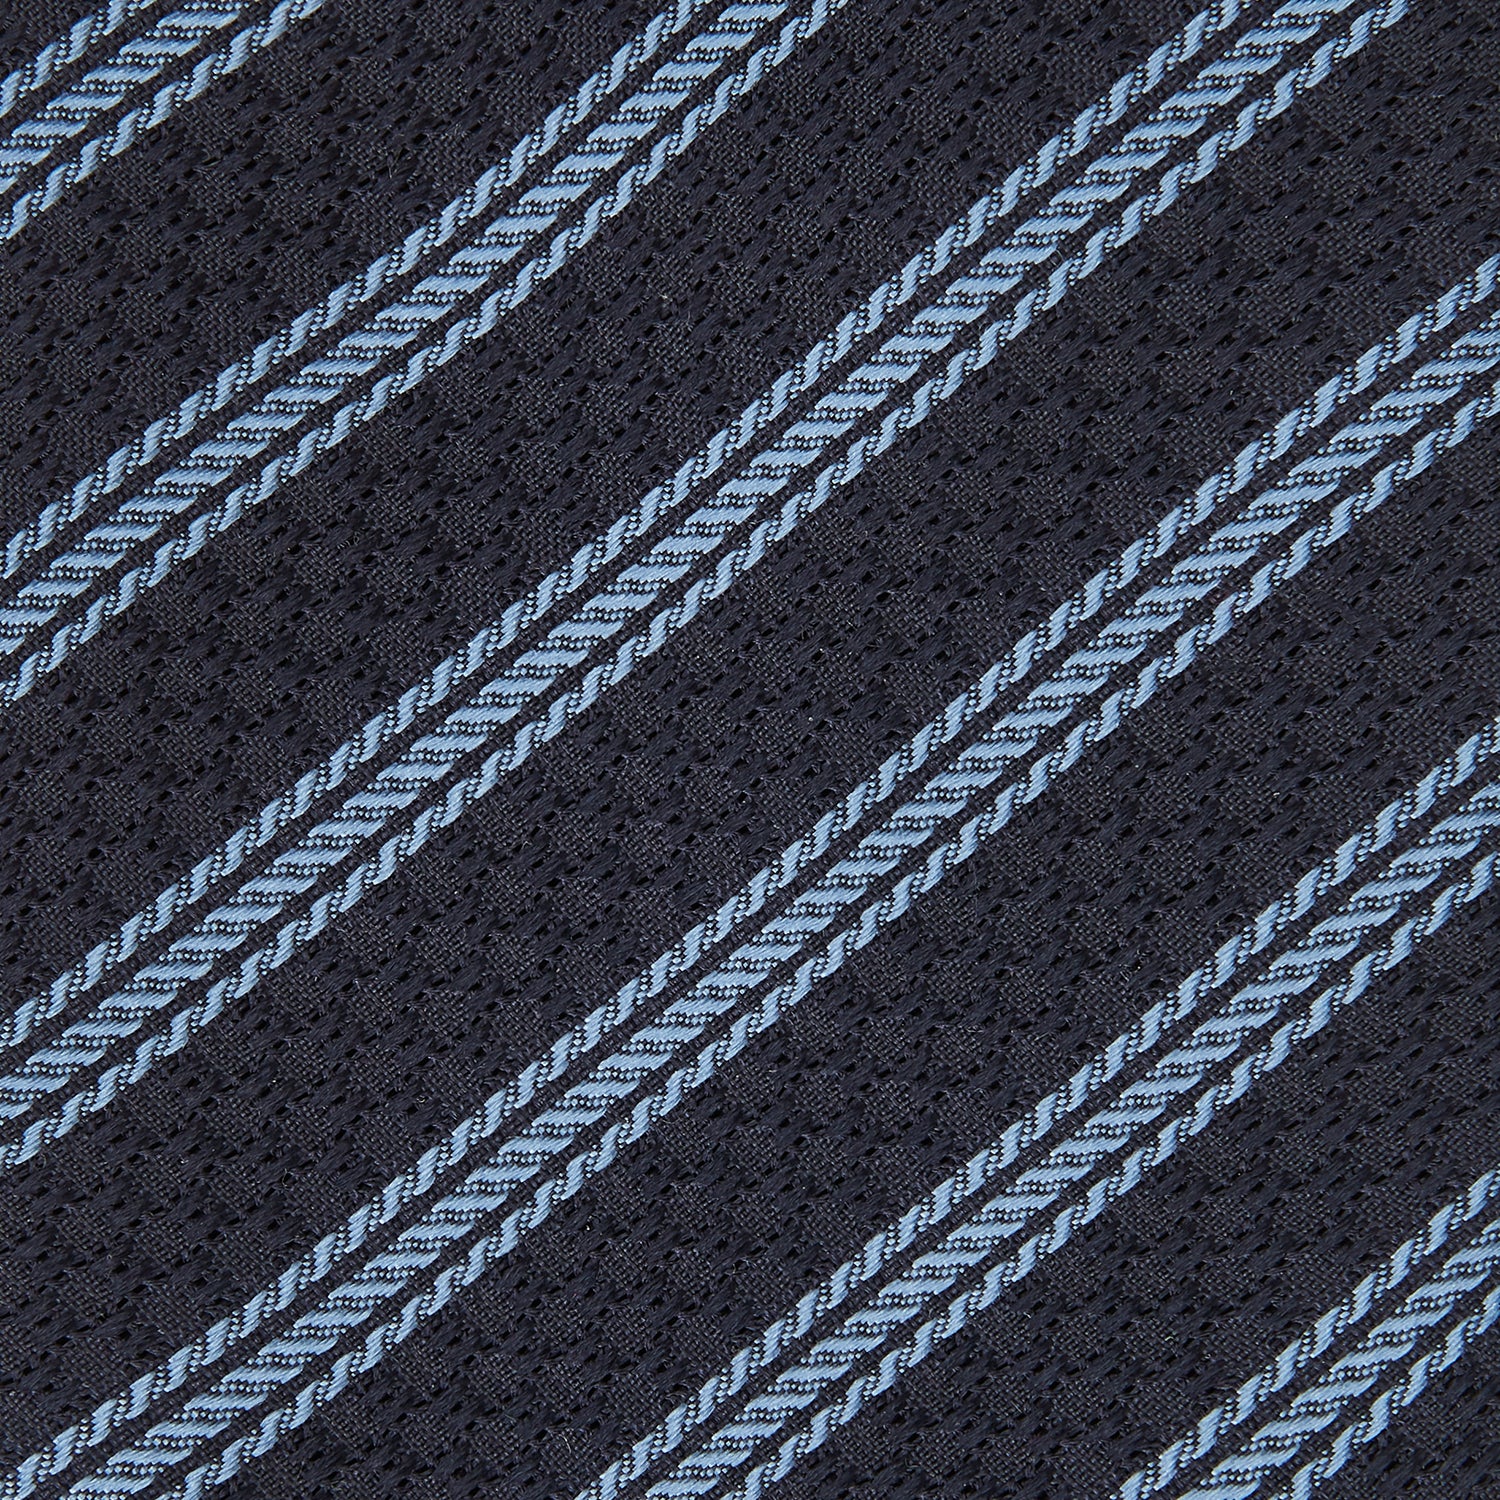 Navy and Light Blue Lace Stripe Silk Tie